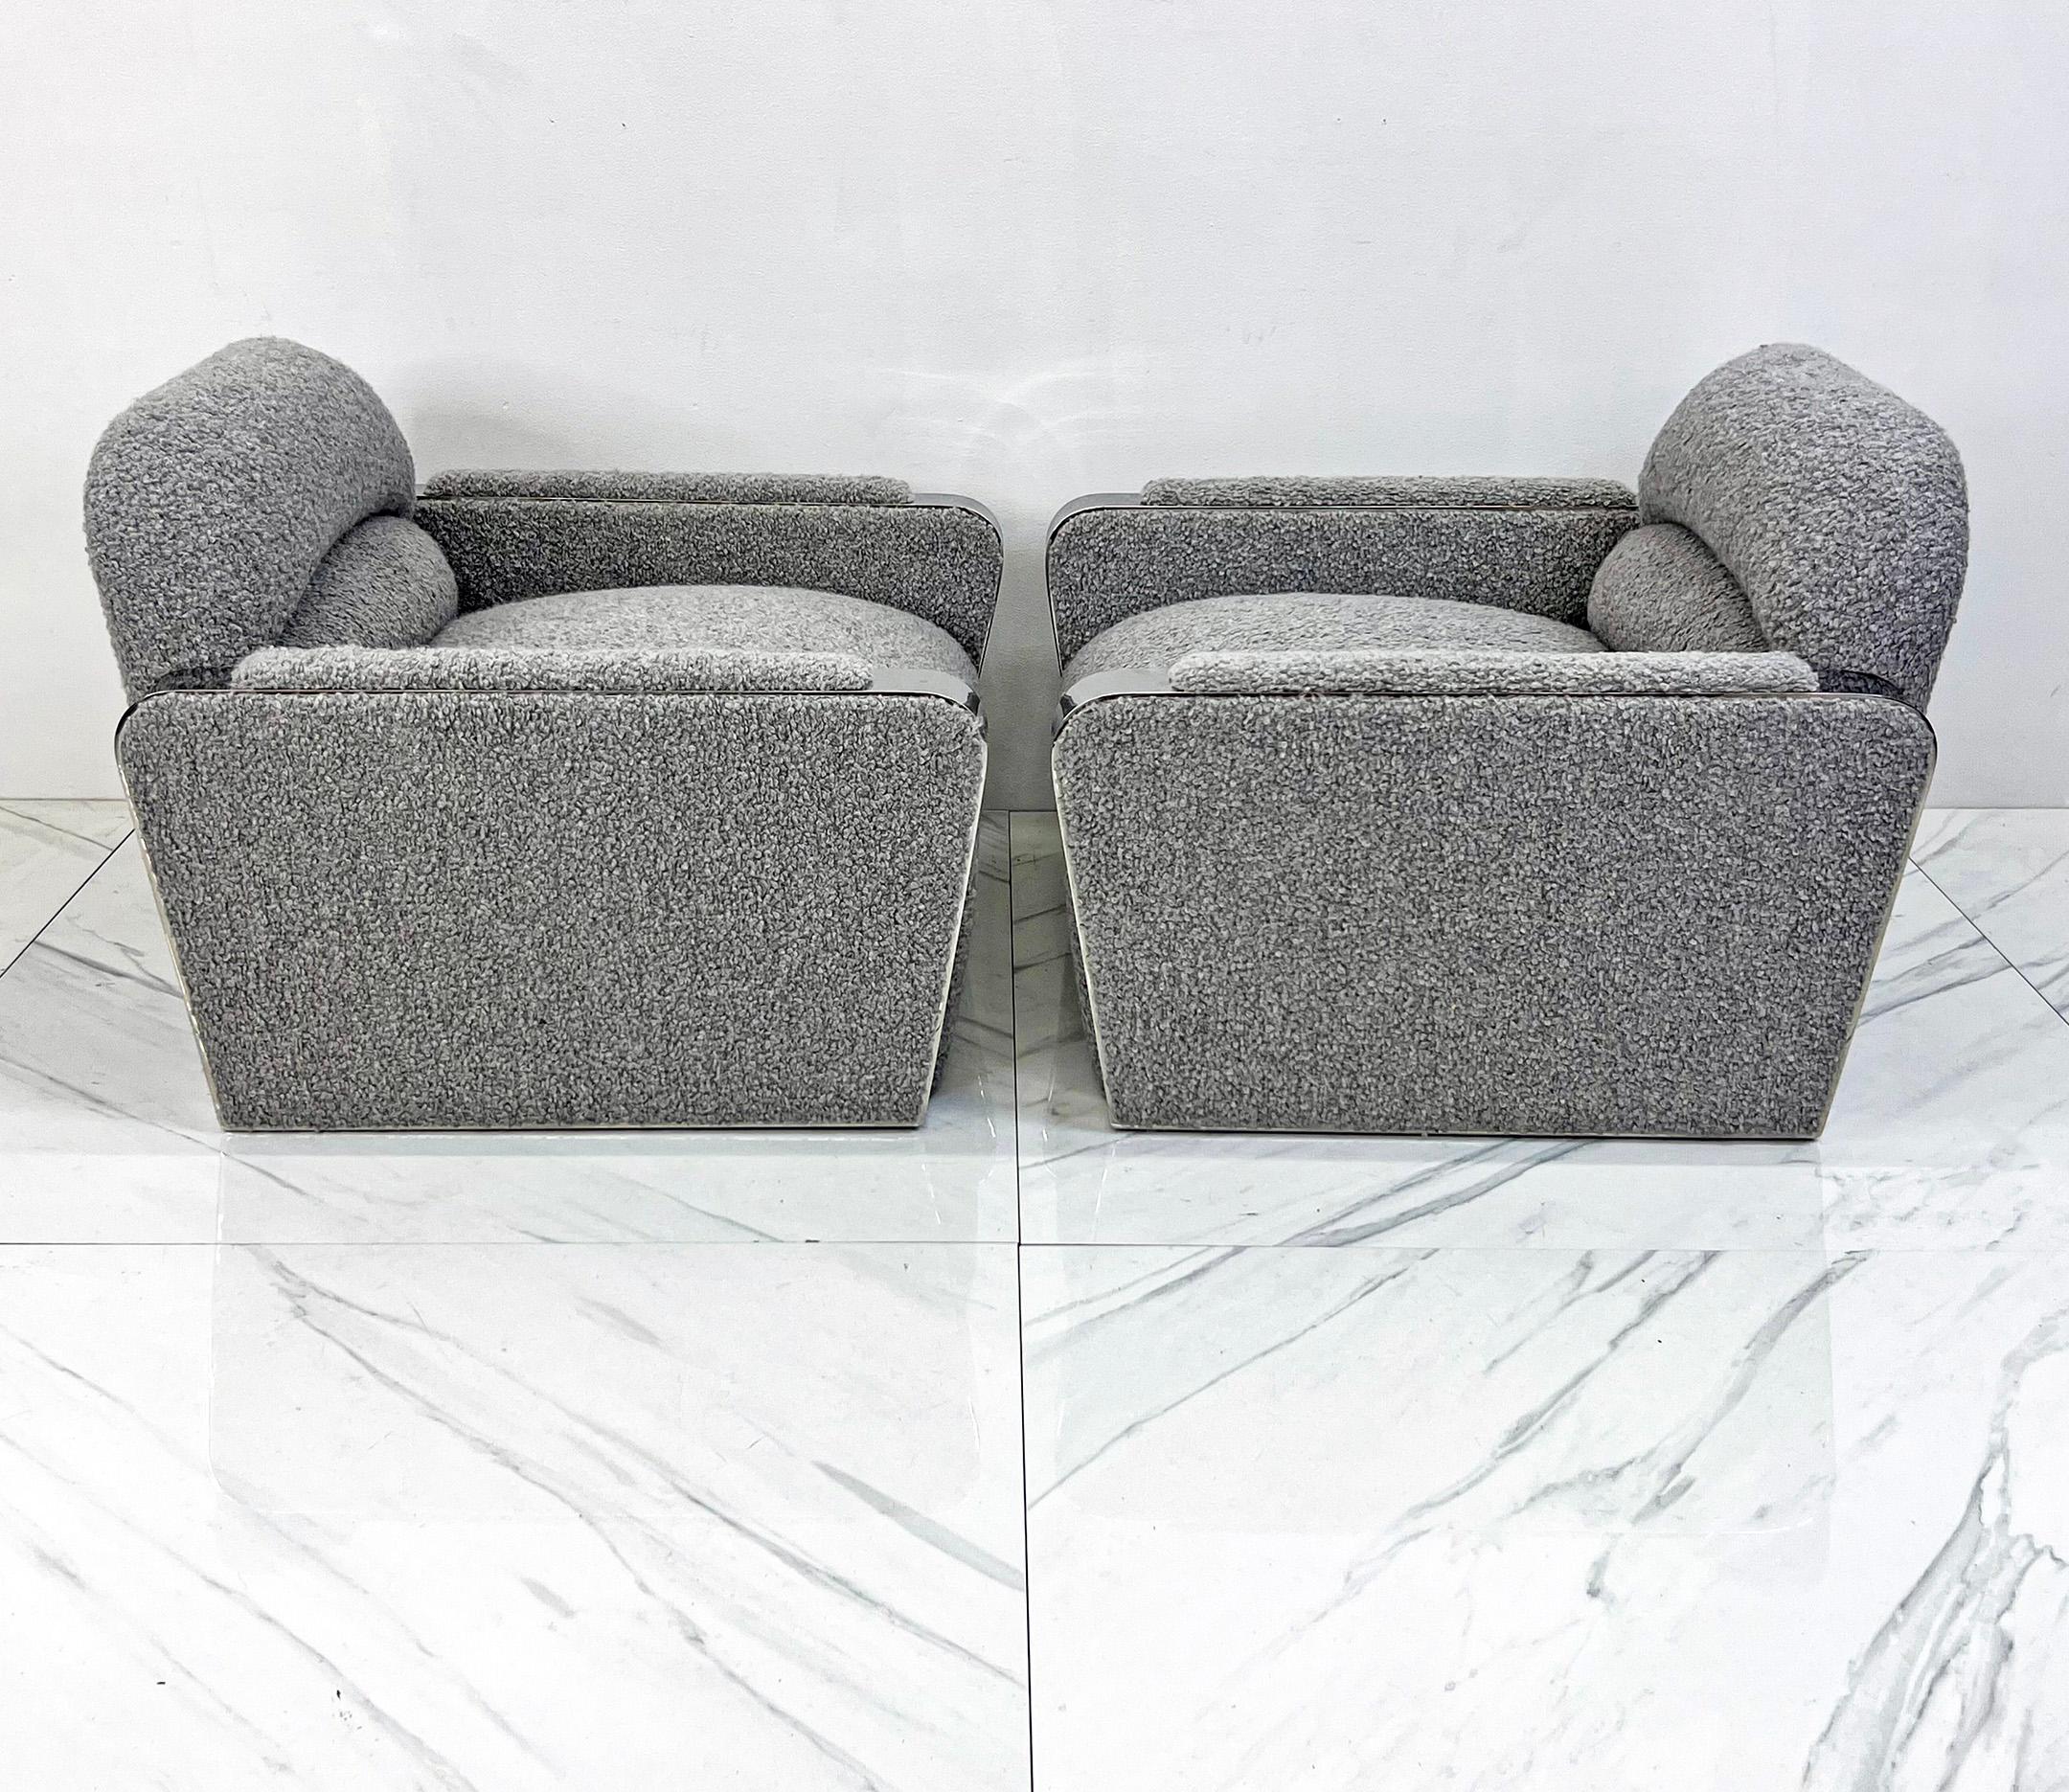 Lounge Chairs by Stanley Jay Friedman for Brueton, Gray Boucle, 1980's, a Pair For Sale 1